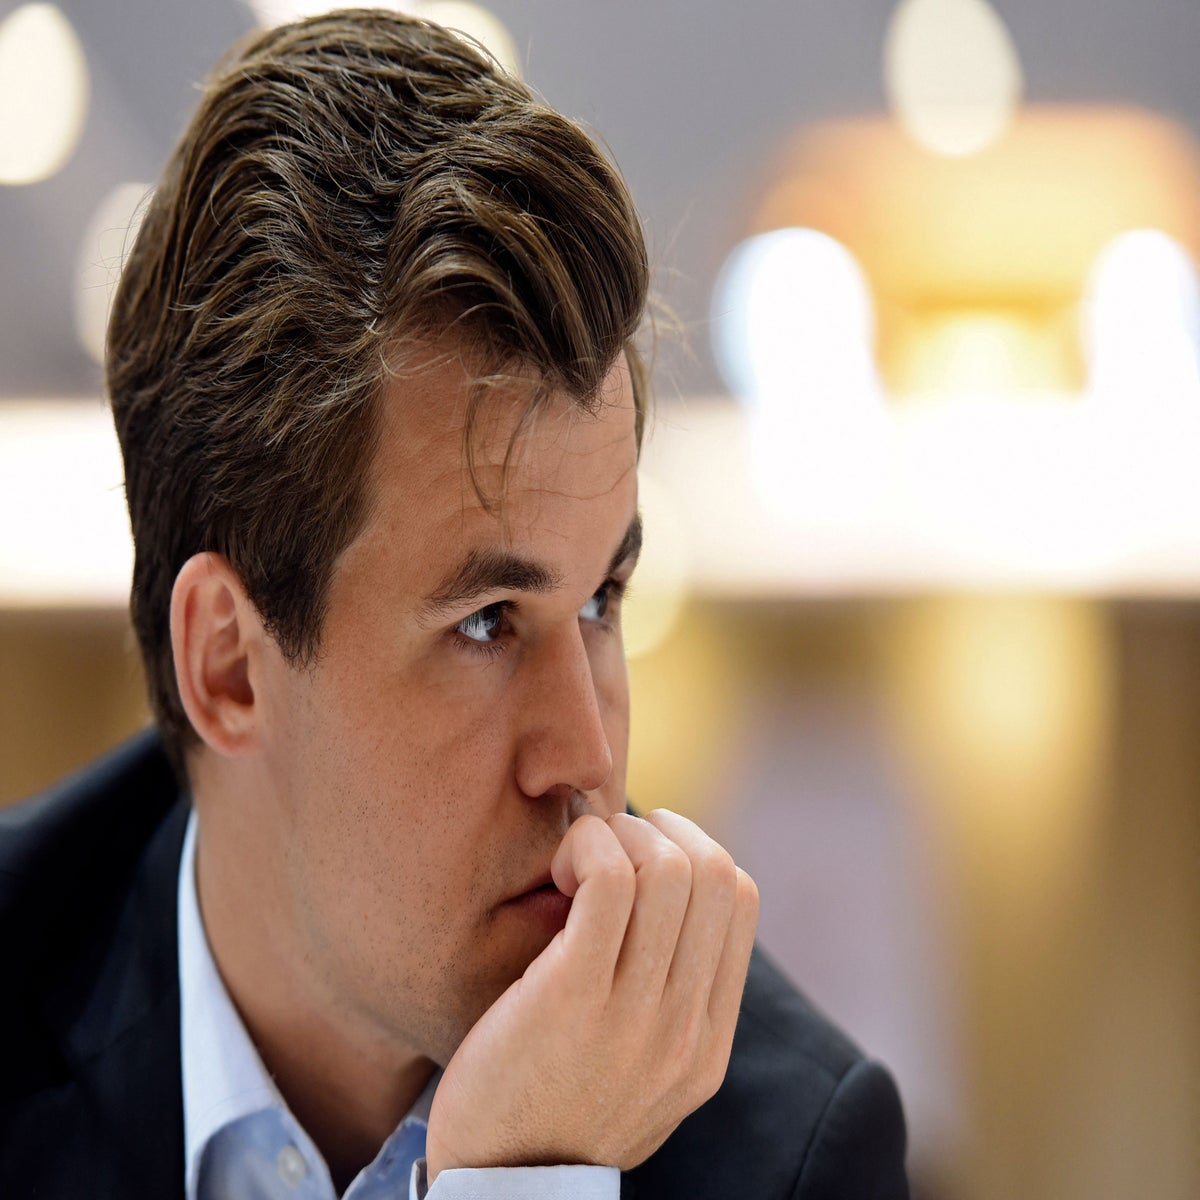 Magnus Carlsen outright accuses Hans Niemann of cheating